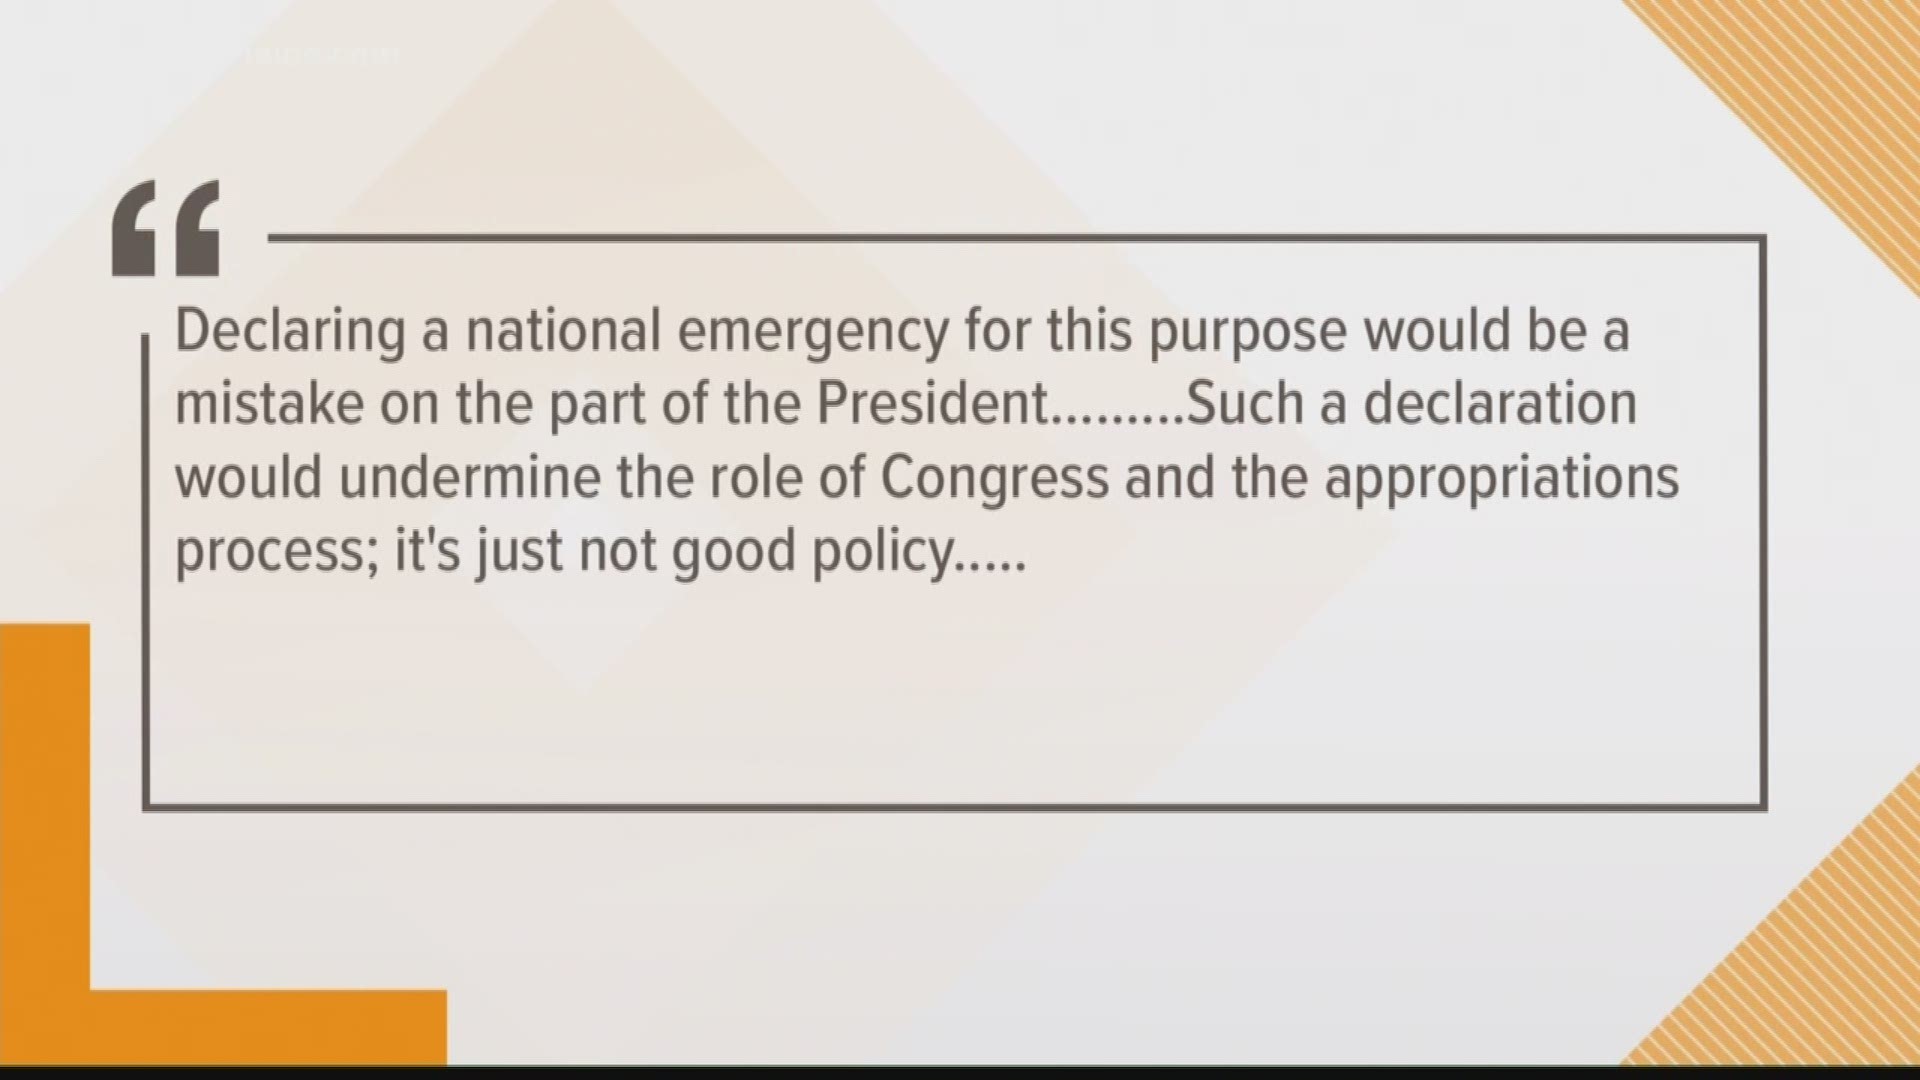 Maine lawmakers are reacting to the threat of a national emergency declaration.